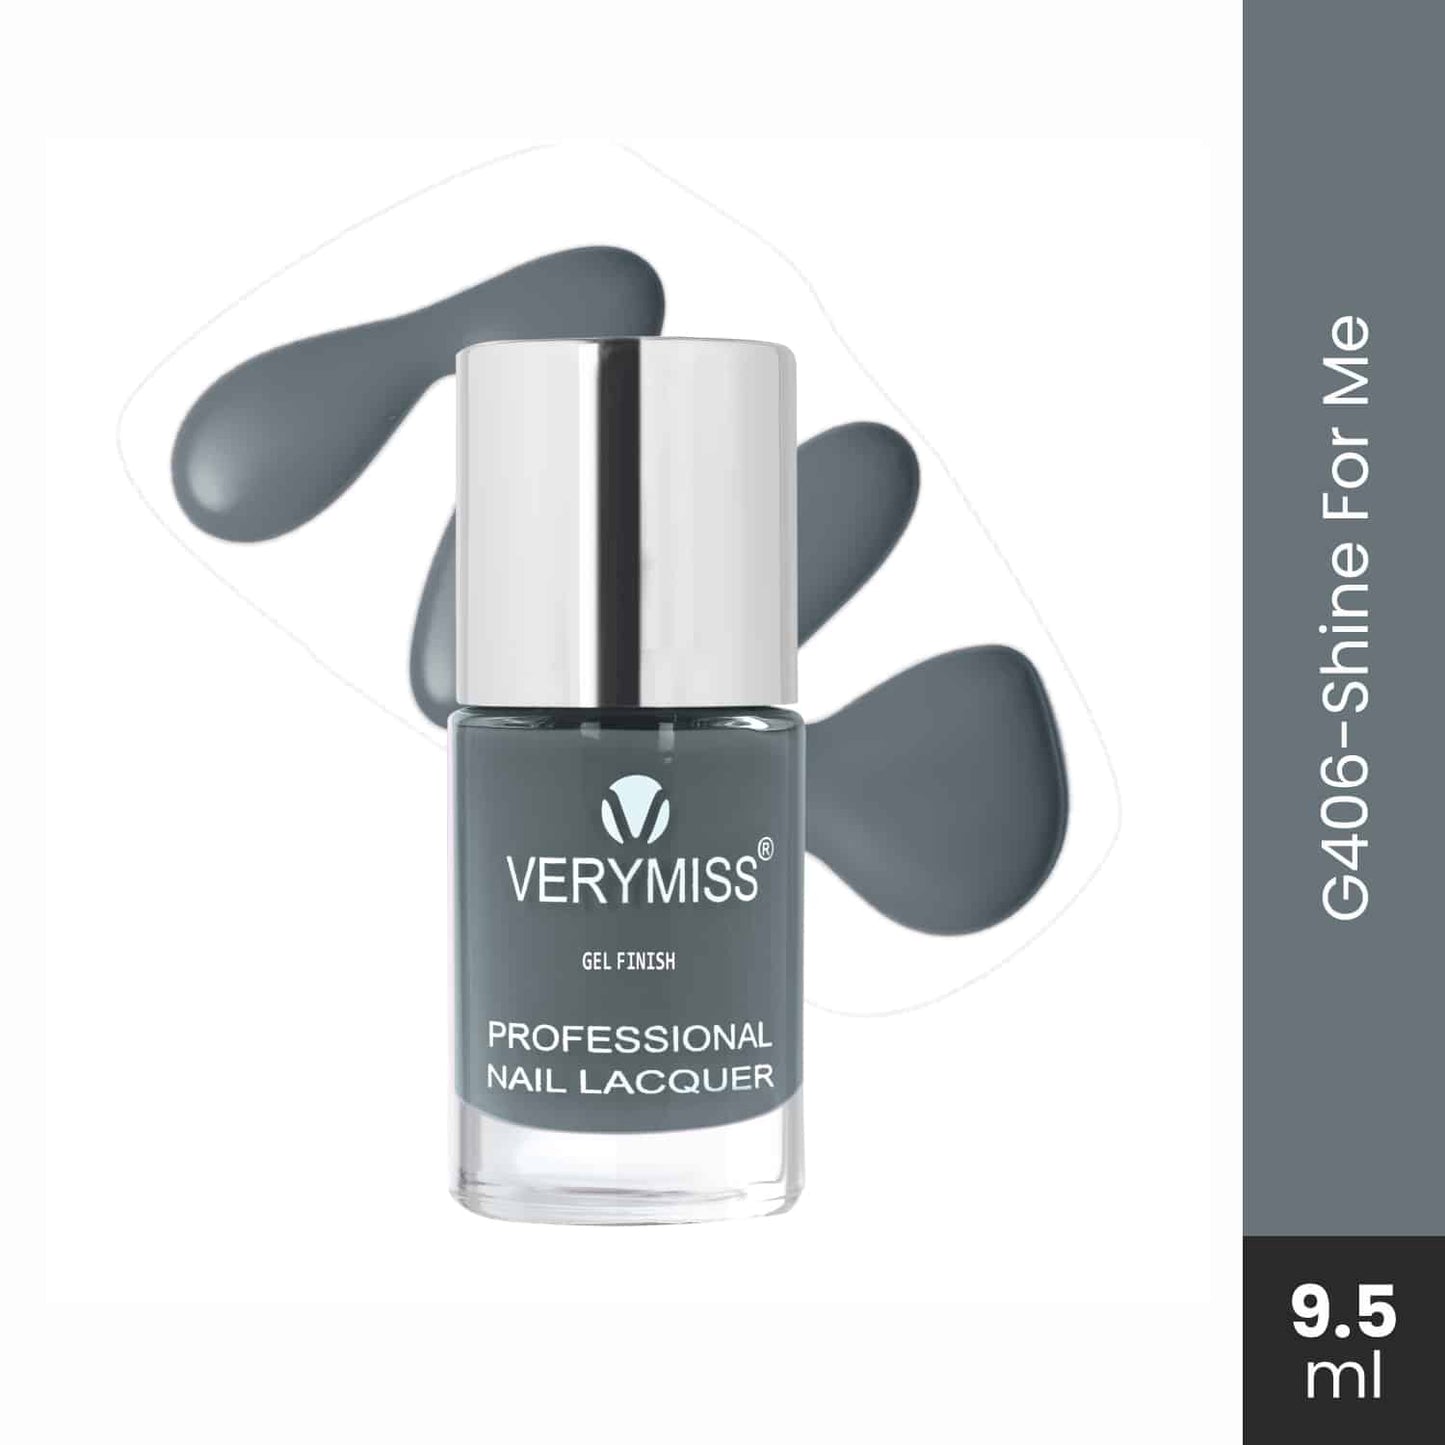 Professional Gel Nail Lacquer - G406 Shine For Me